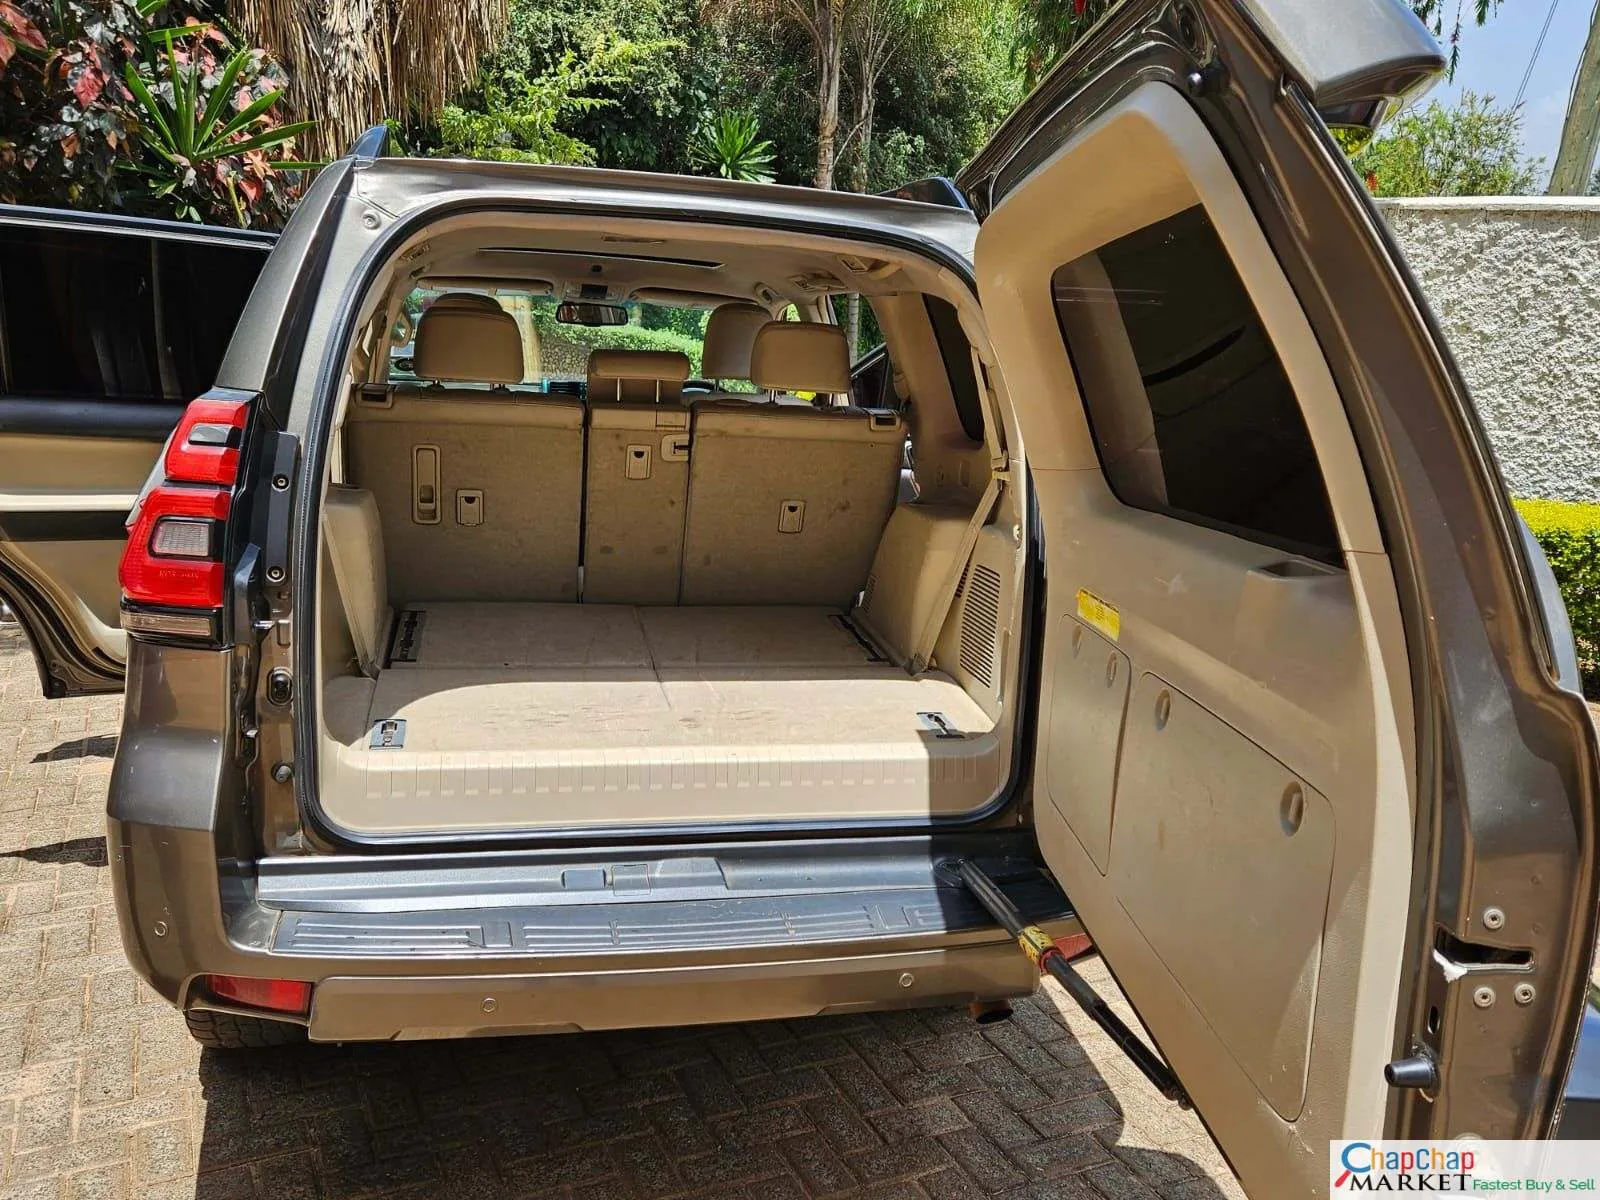 Toyota Prado VXL Fully Loaded You Pay 40% Deposit Trade in OK New for sale in Kenya hire purchase installments